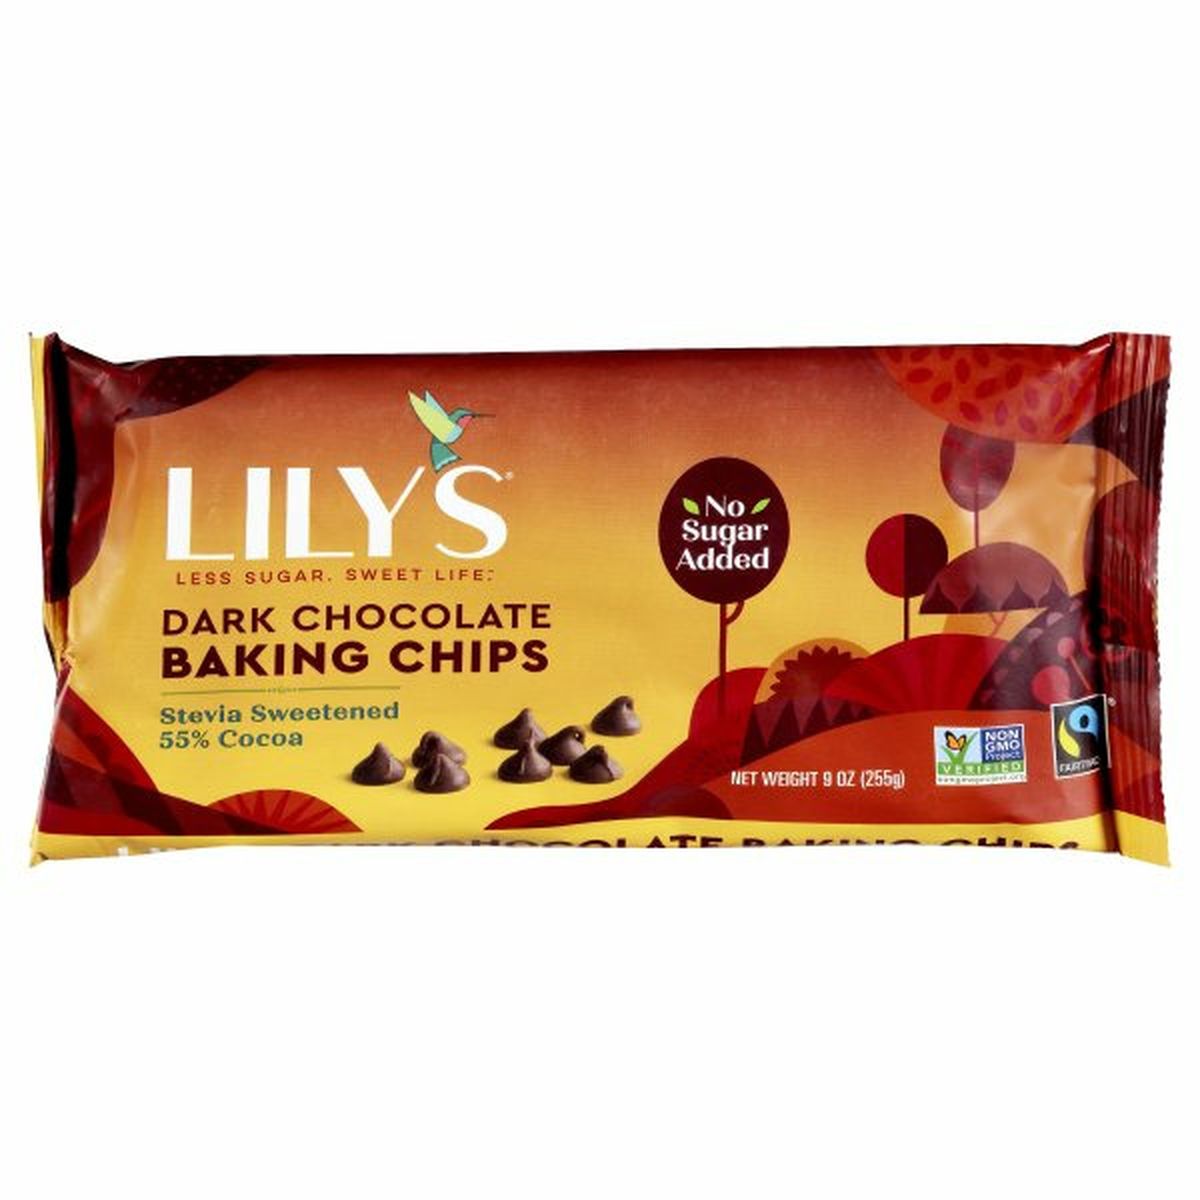 Calories in Lily's Baking Chips, Dark Chocolate, 55% Cocoa